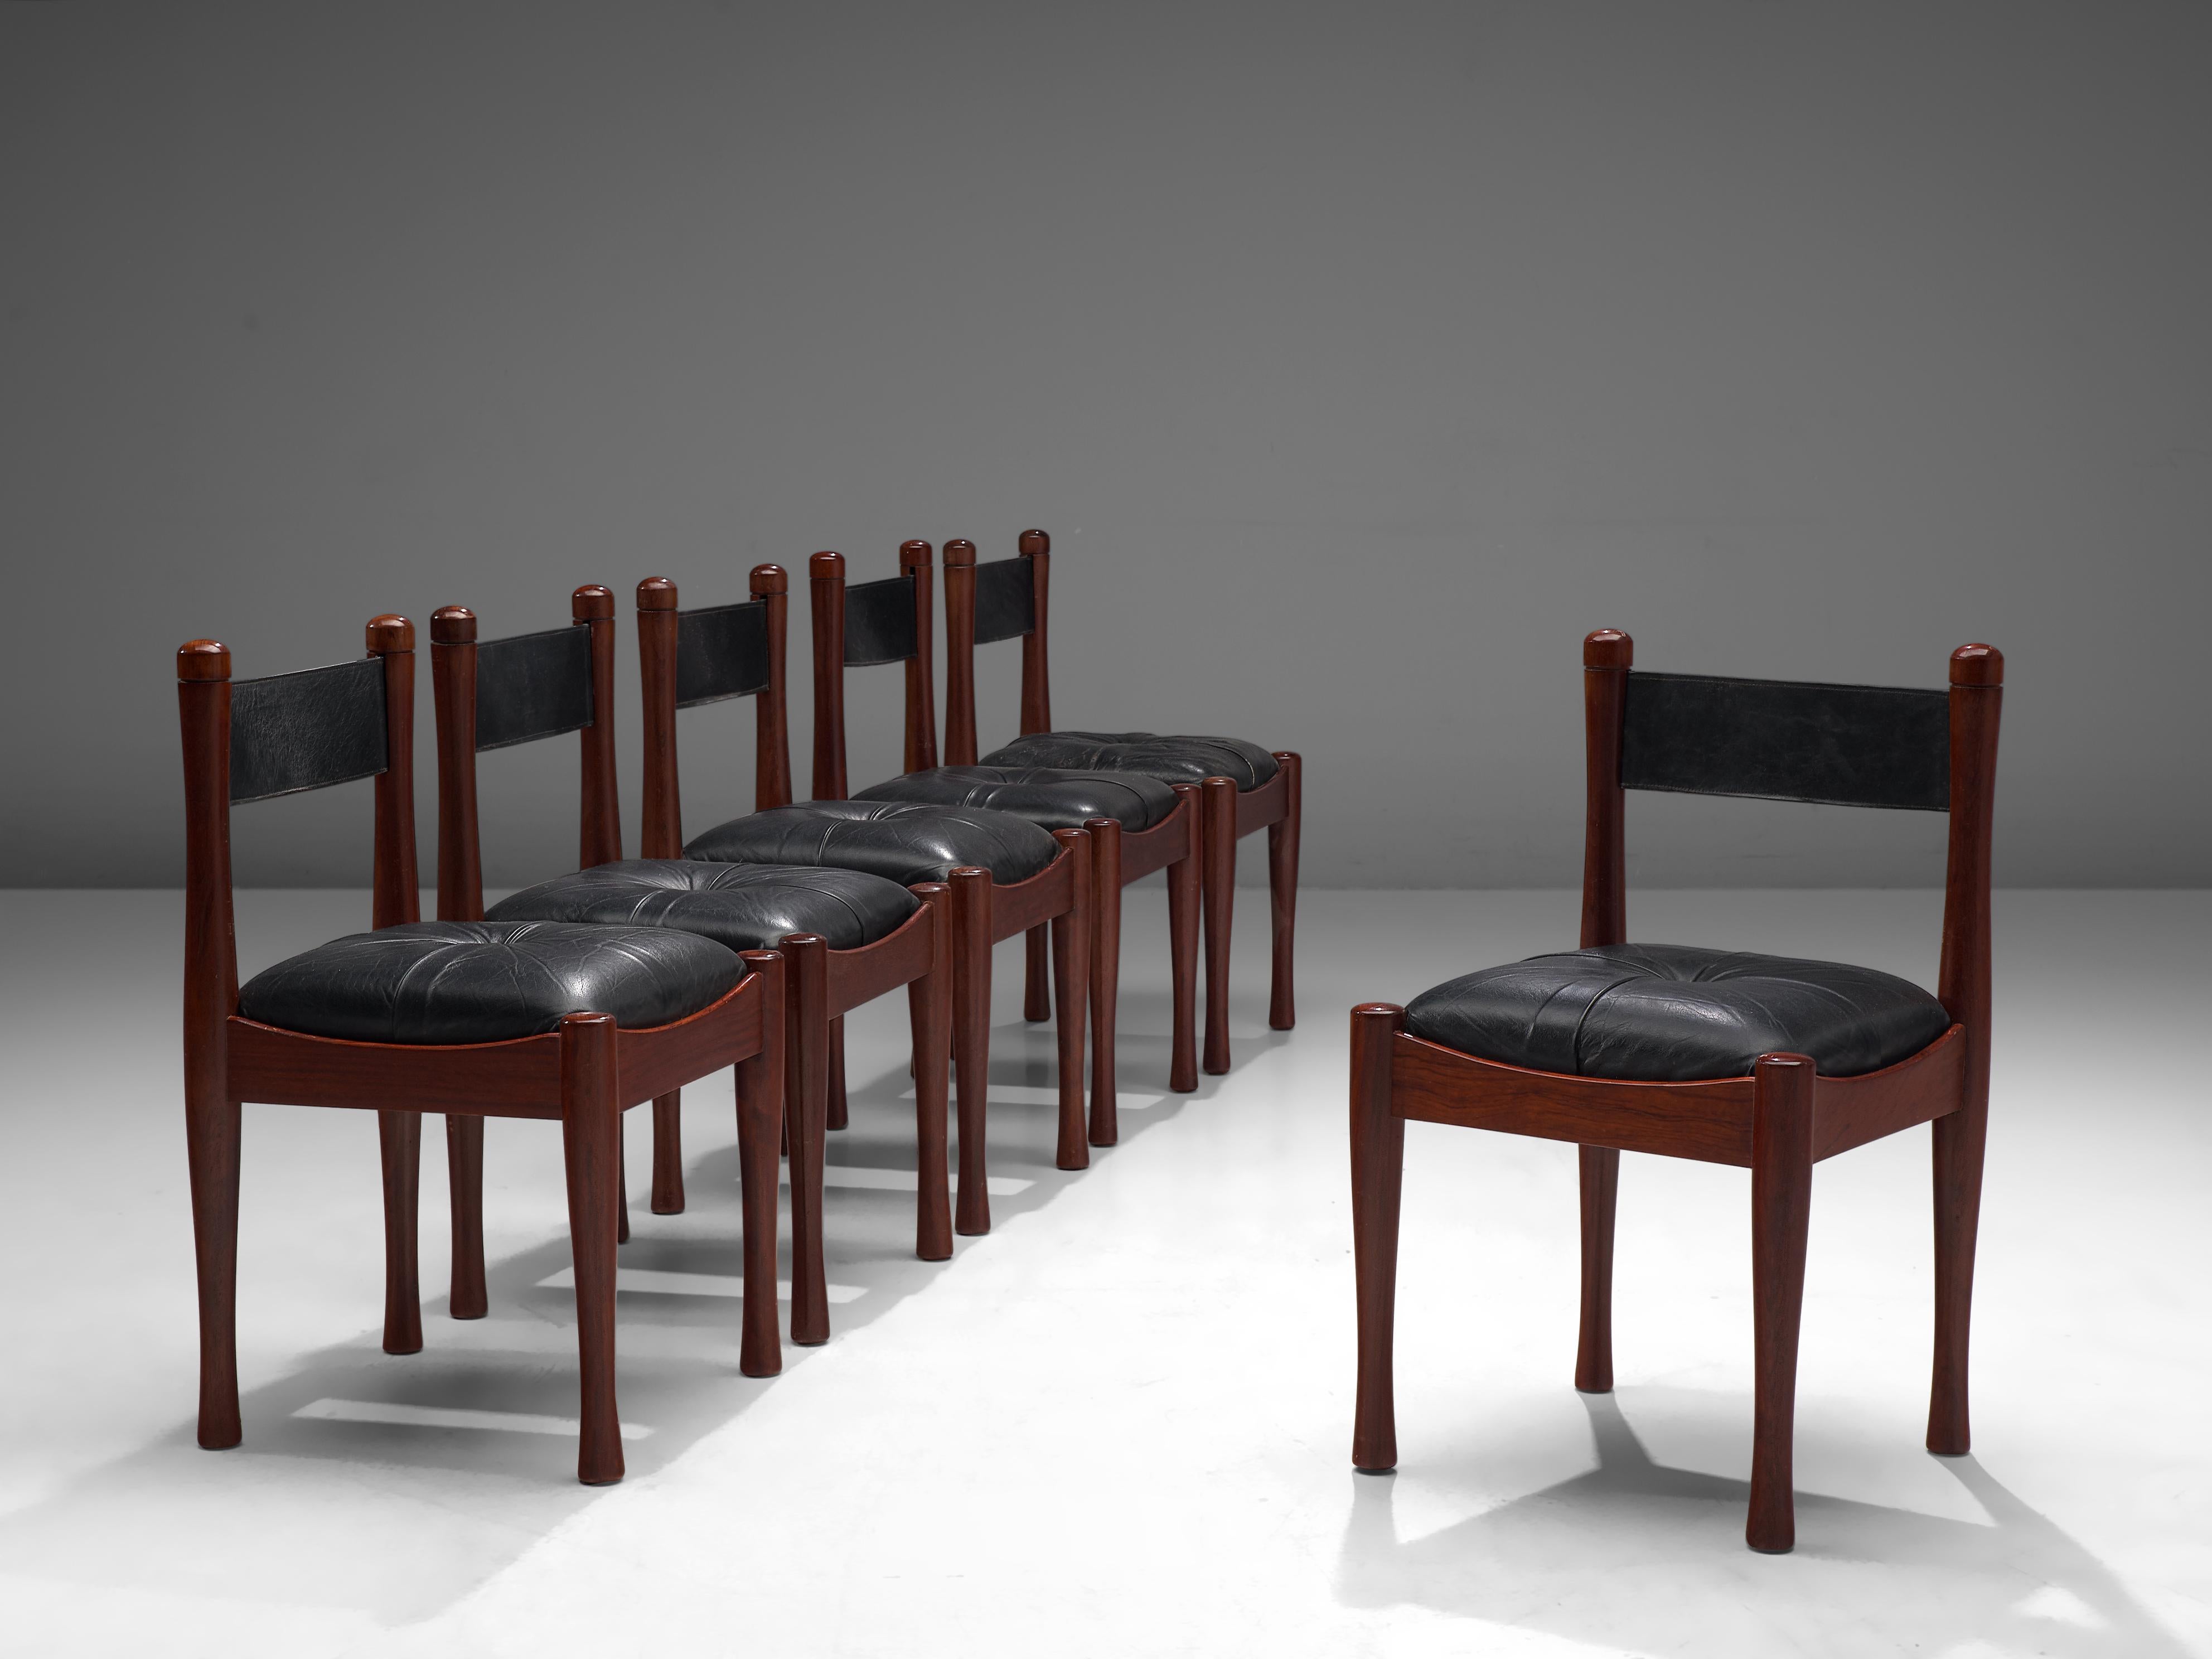 Silvio Coppola for Bernini, set of six dining chairs, stained wood, leather, Italy, 1960s

This set of chairs are designed by Silvio Coppola for Bernini in the 1960s. These chairs feature a characteristic darkened frame and upholstered black leather